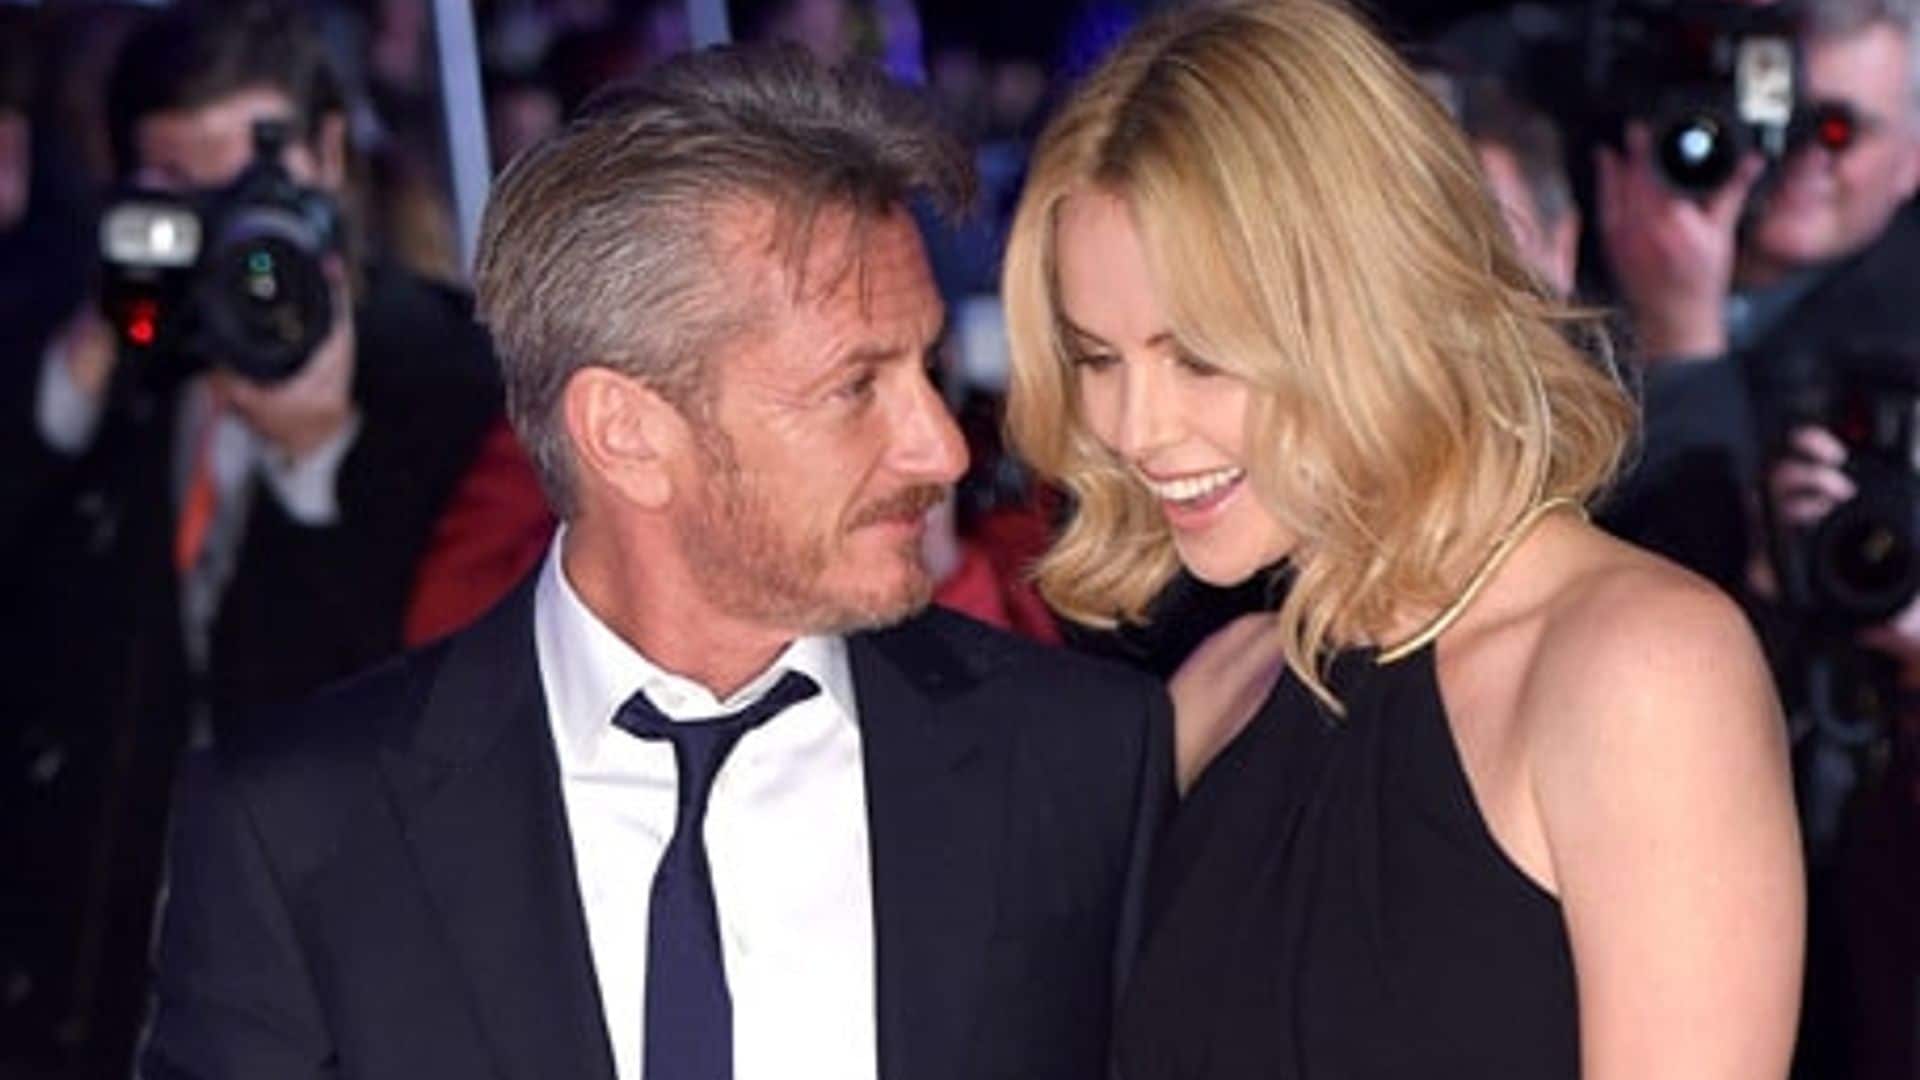 Sean Penn only has eyes for Charlize Theron at U.K. premiere of The Gunman